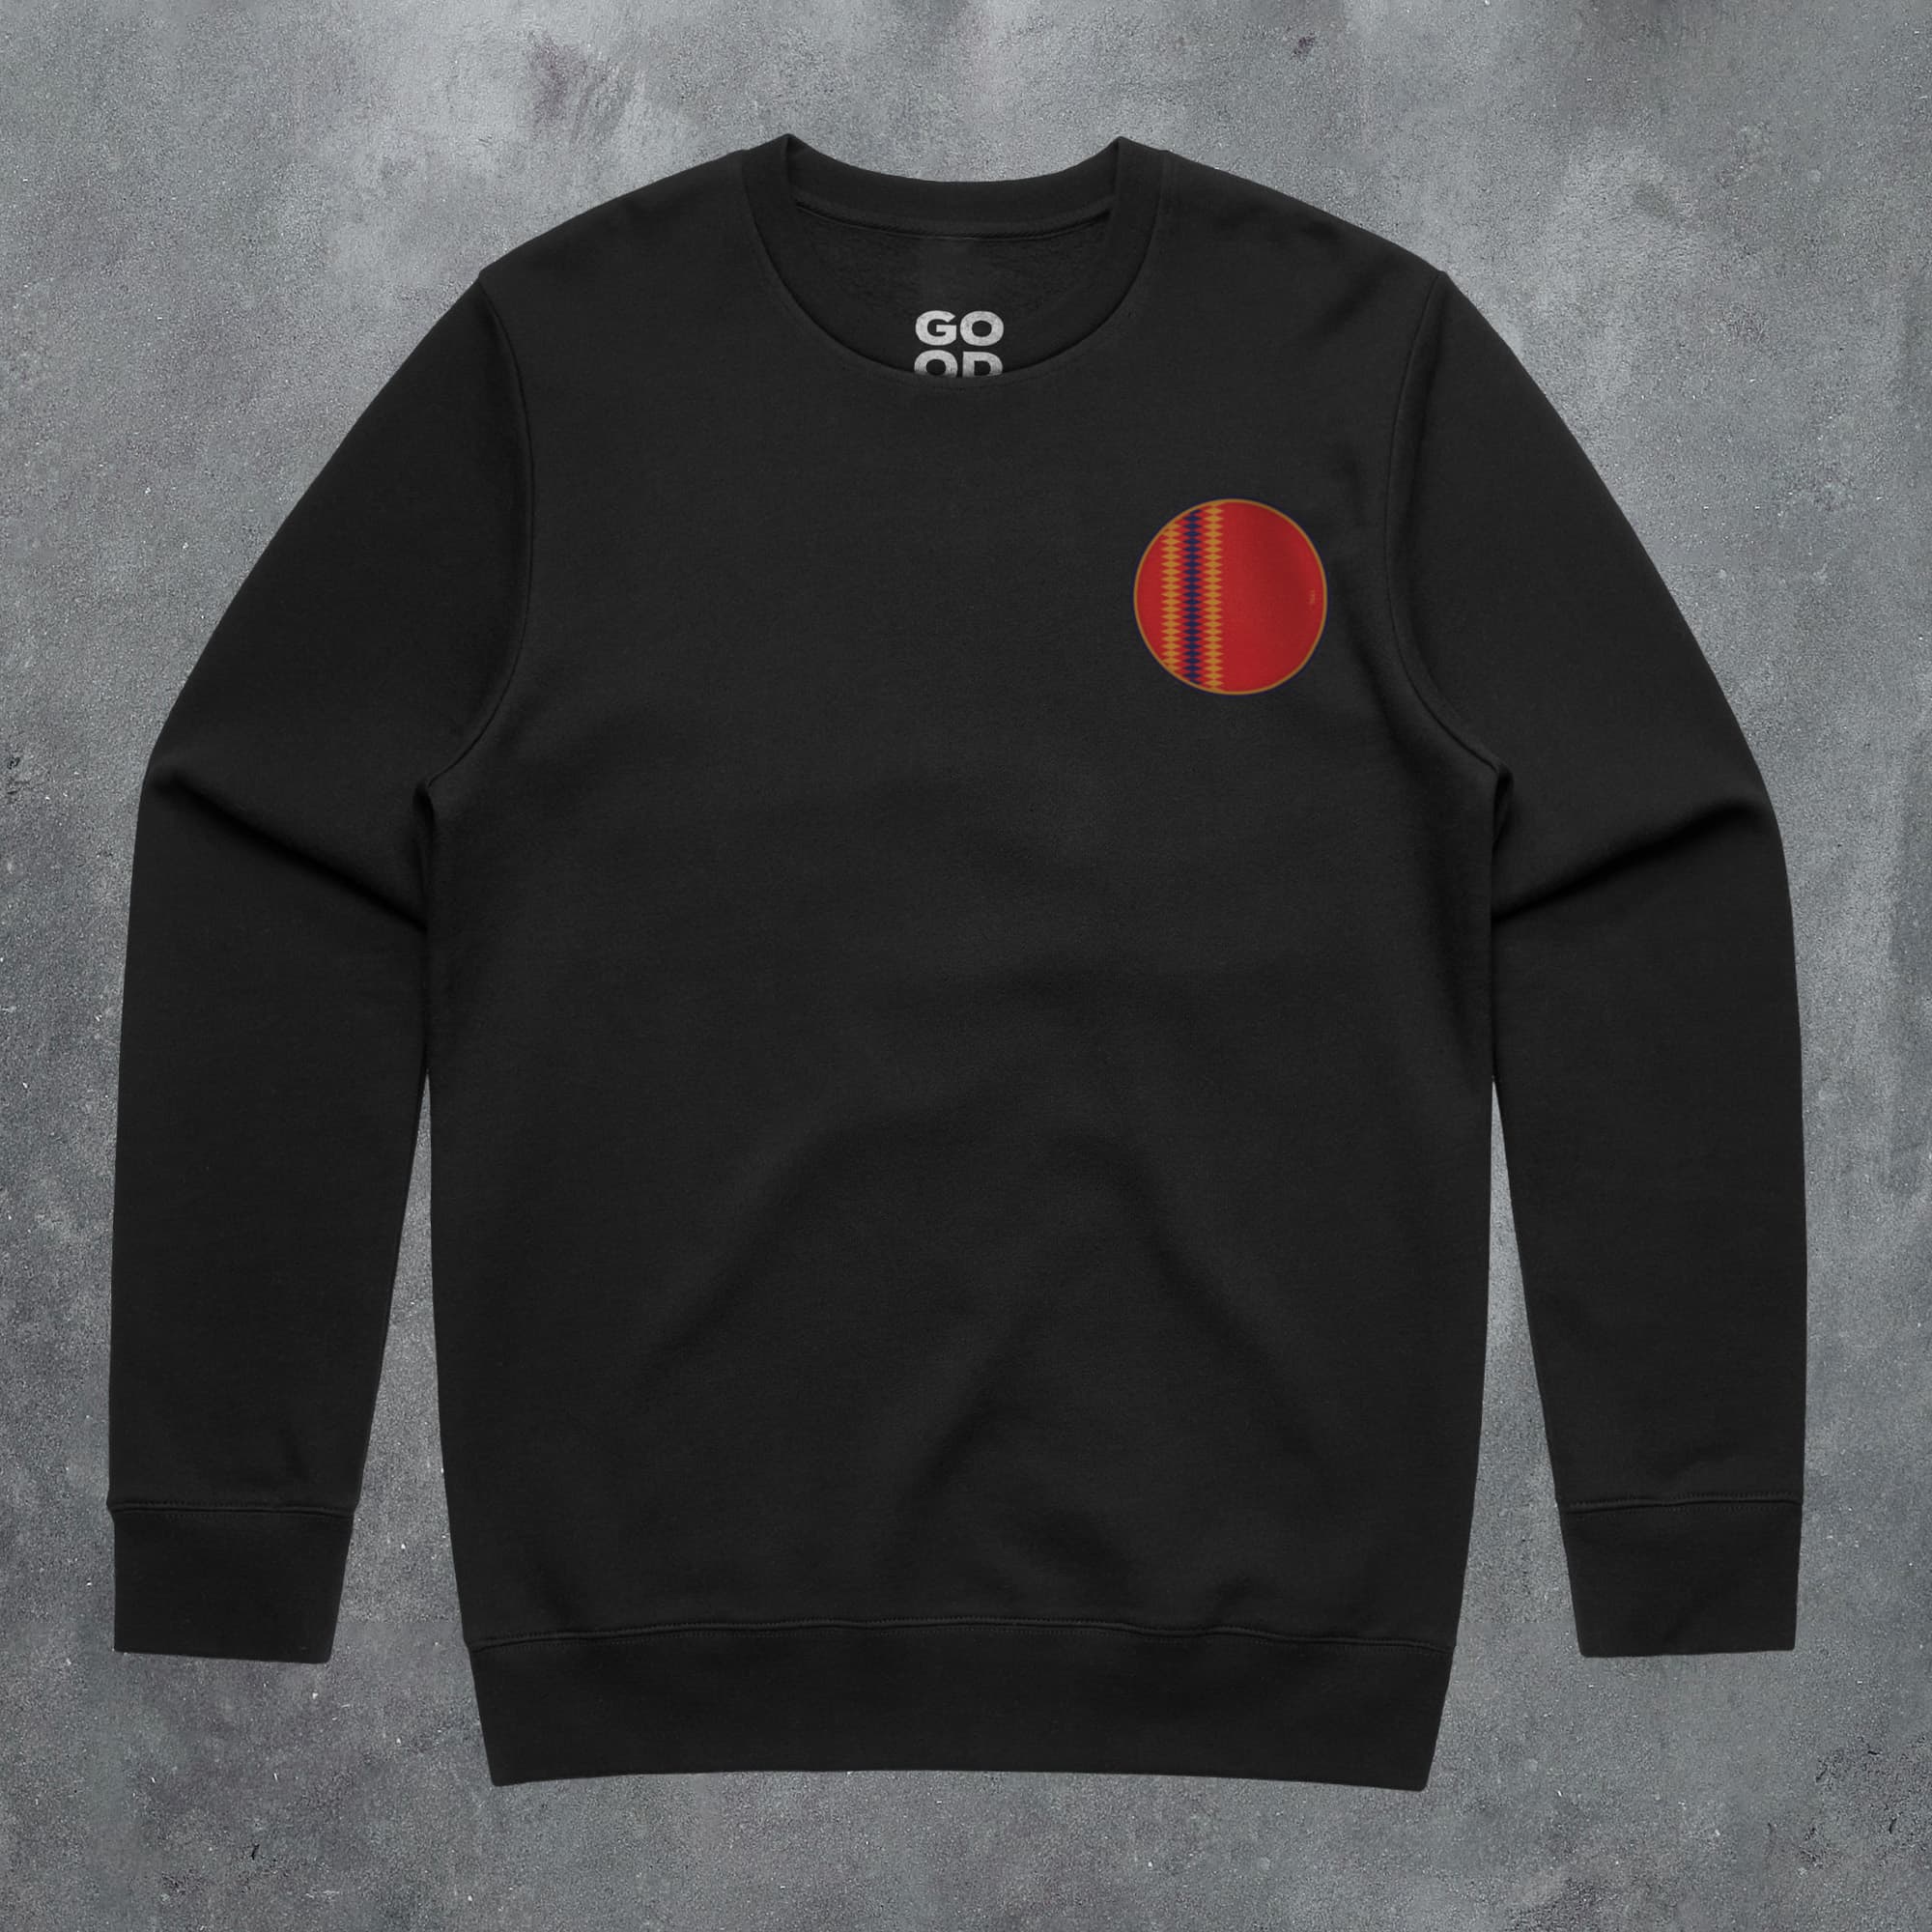 a black sweatshirt with a red circle on it